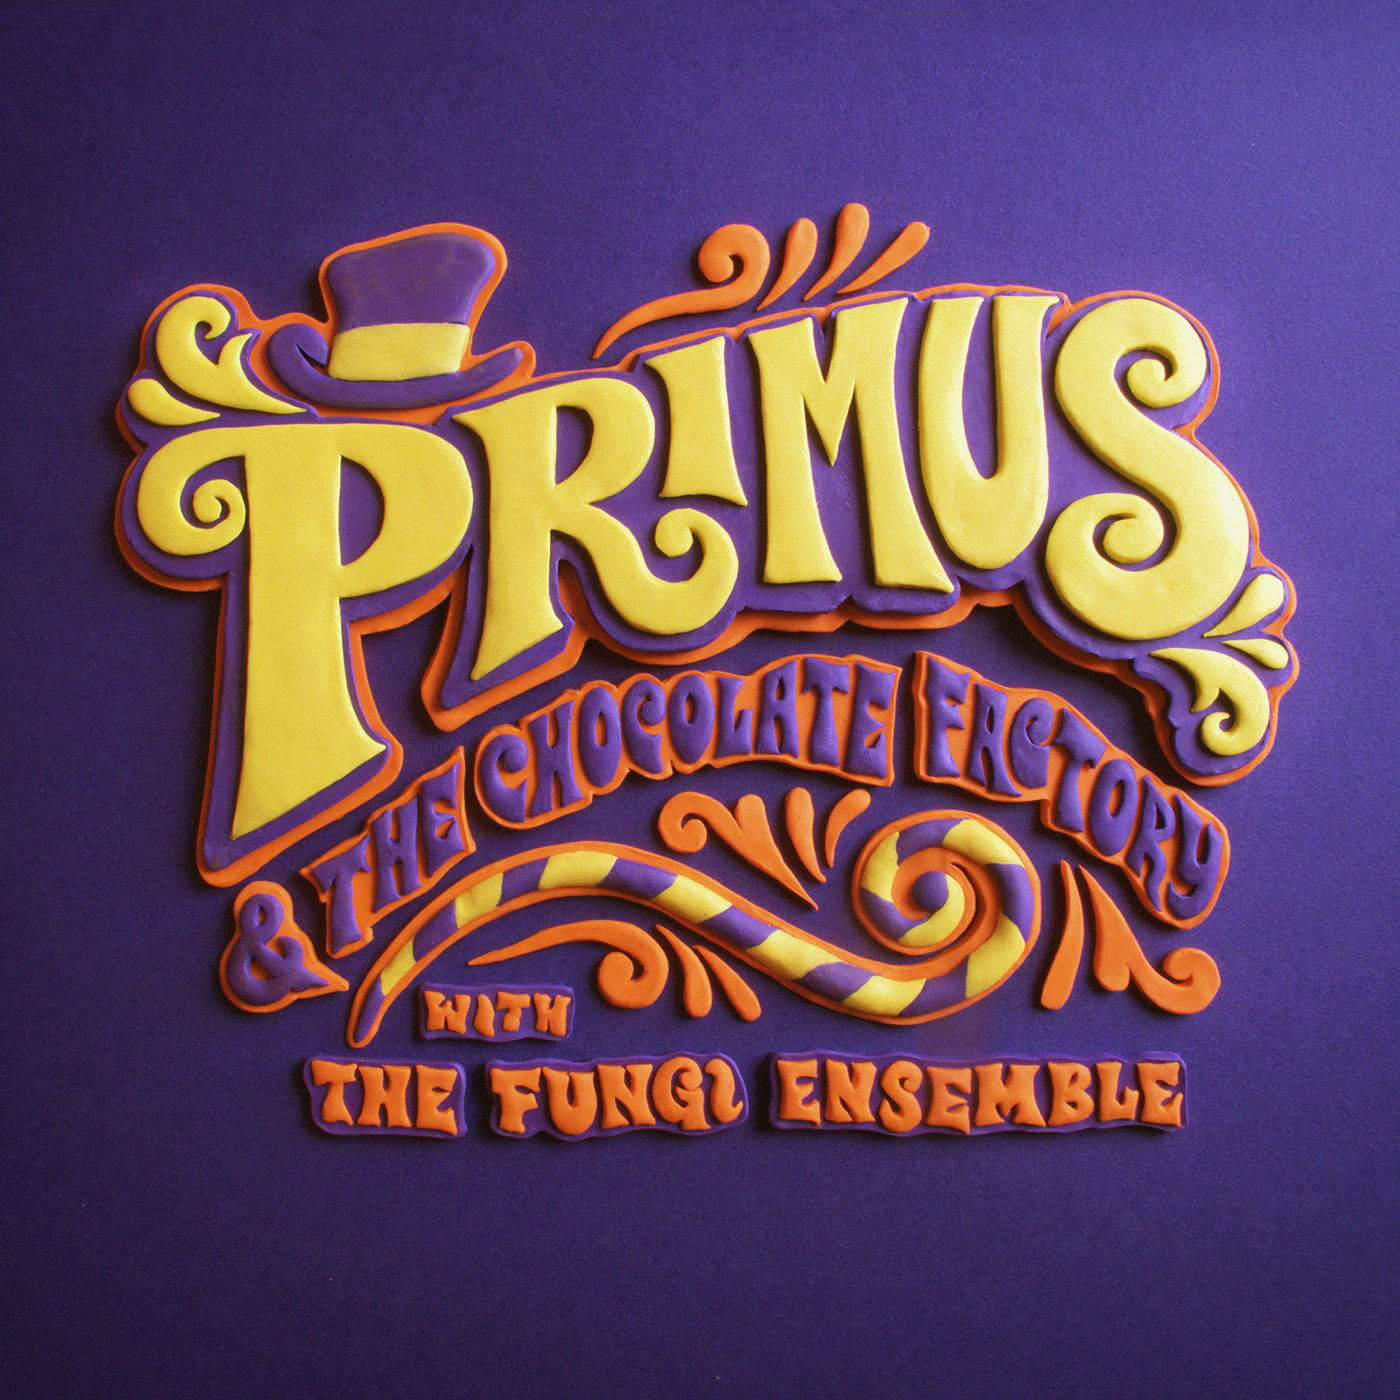 Primus - Primus & the Chocolate Factory with the Fungi Ensemble (2014) [FLAC 24bit/44,1kHz]